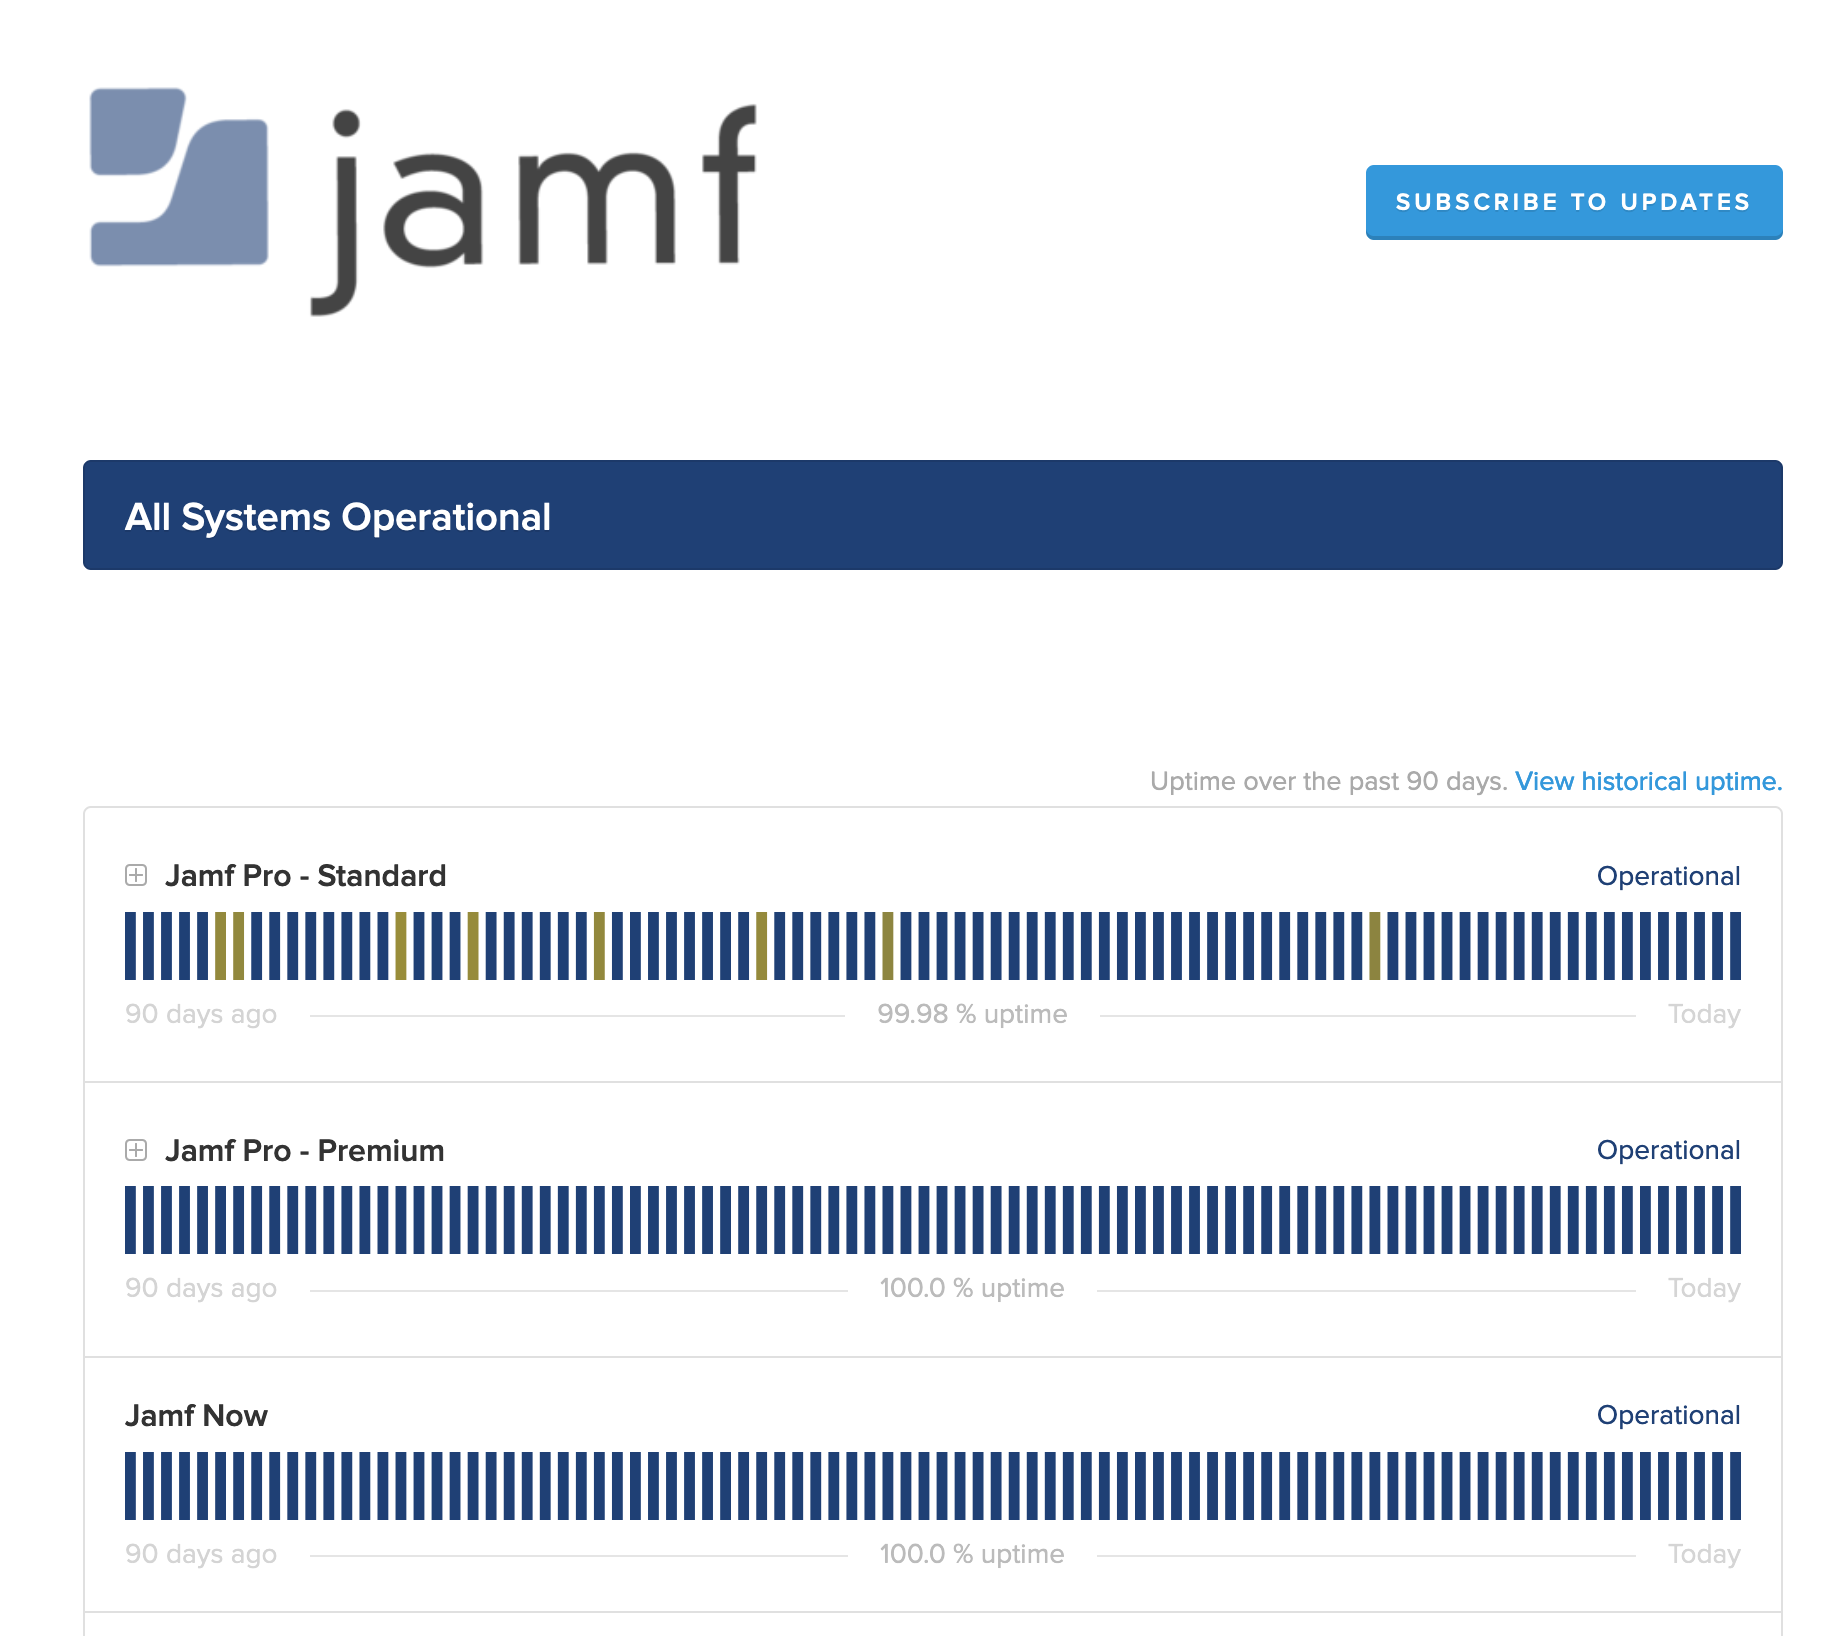 Screenshot with the Jamf logo, displaying the statuses of all the operational systems, and a button to subscribe to updates.